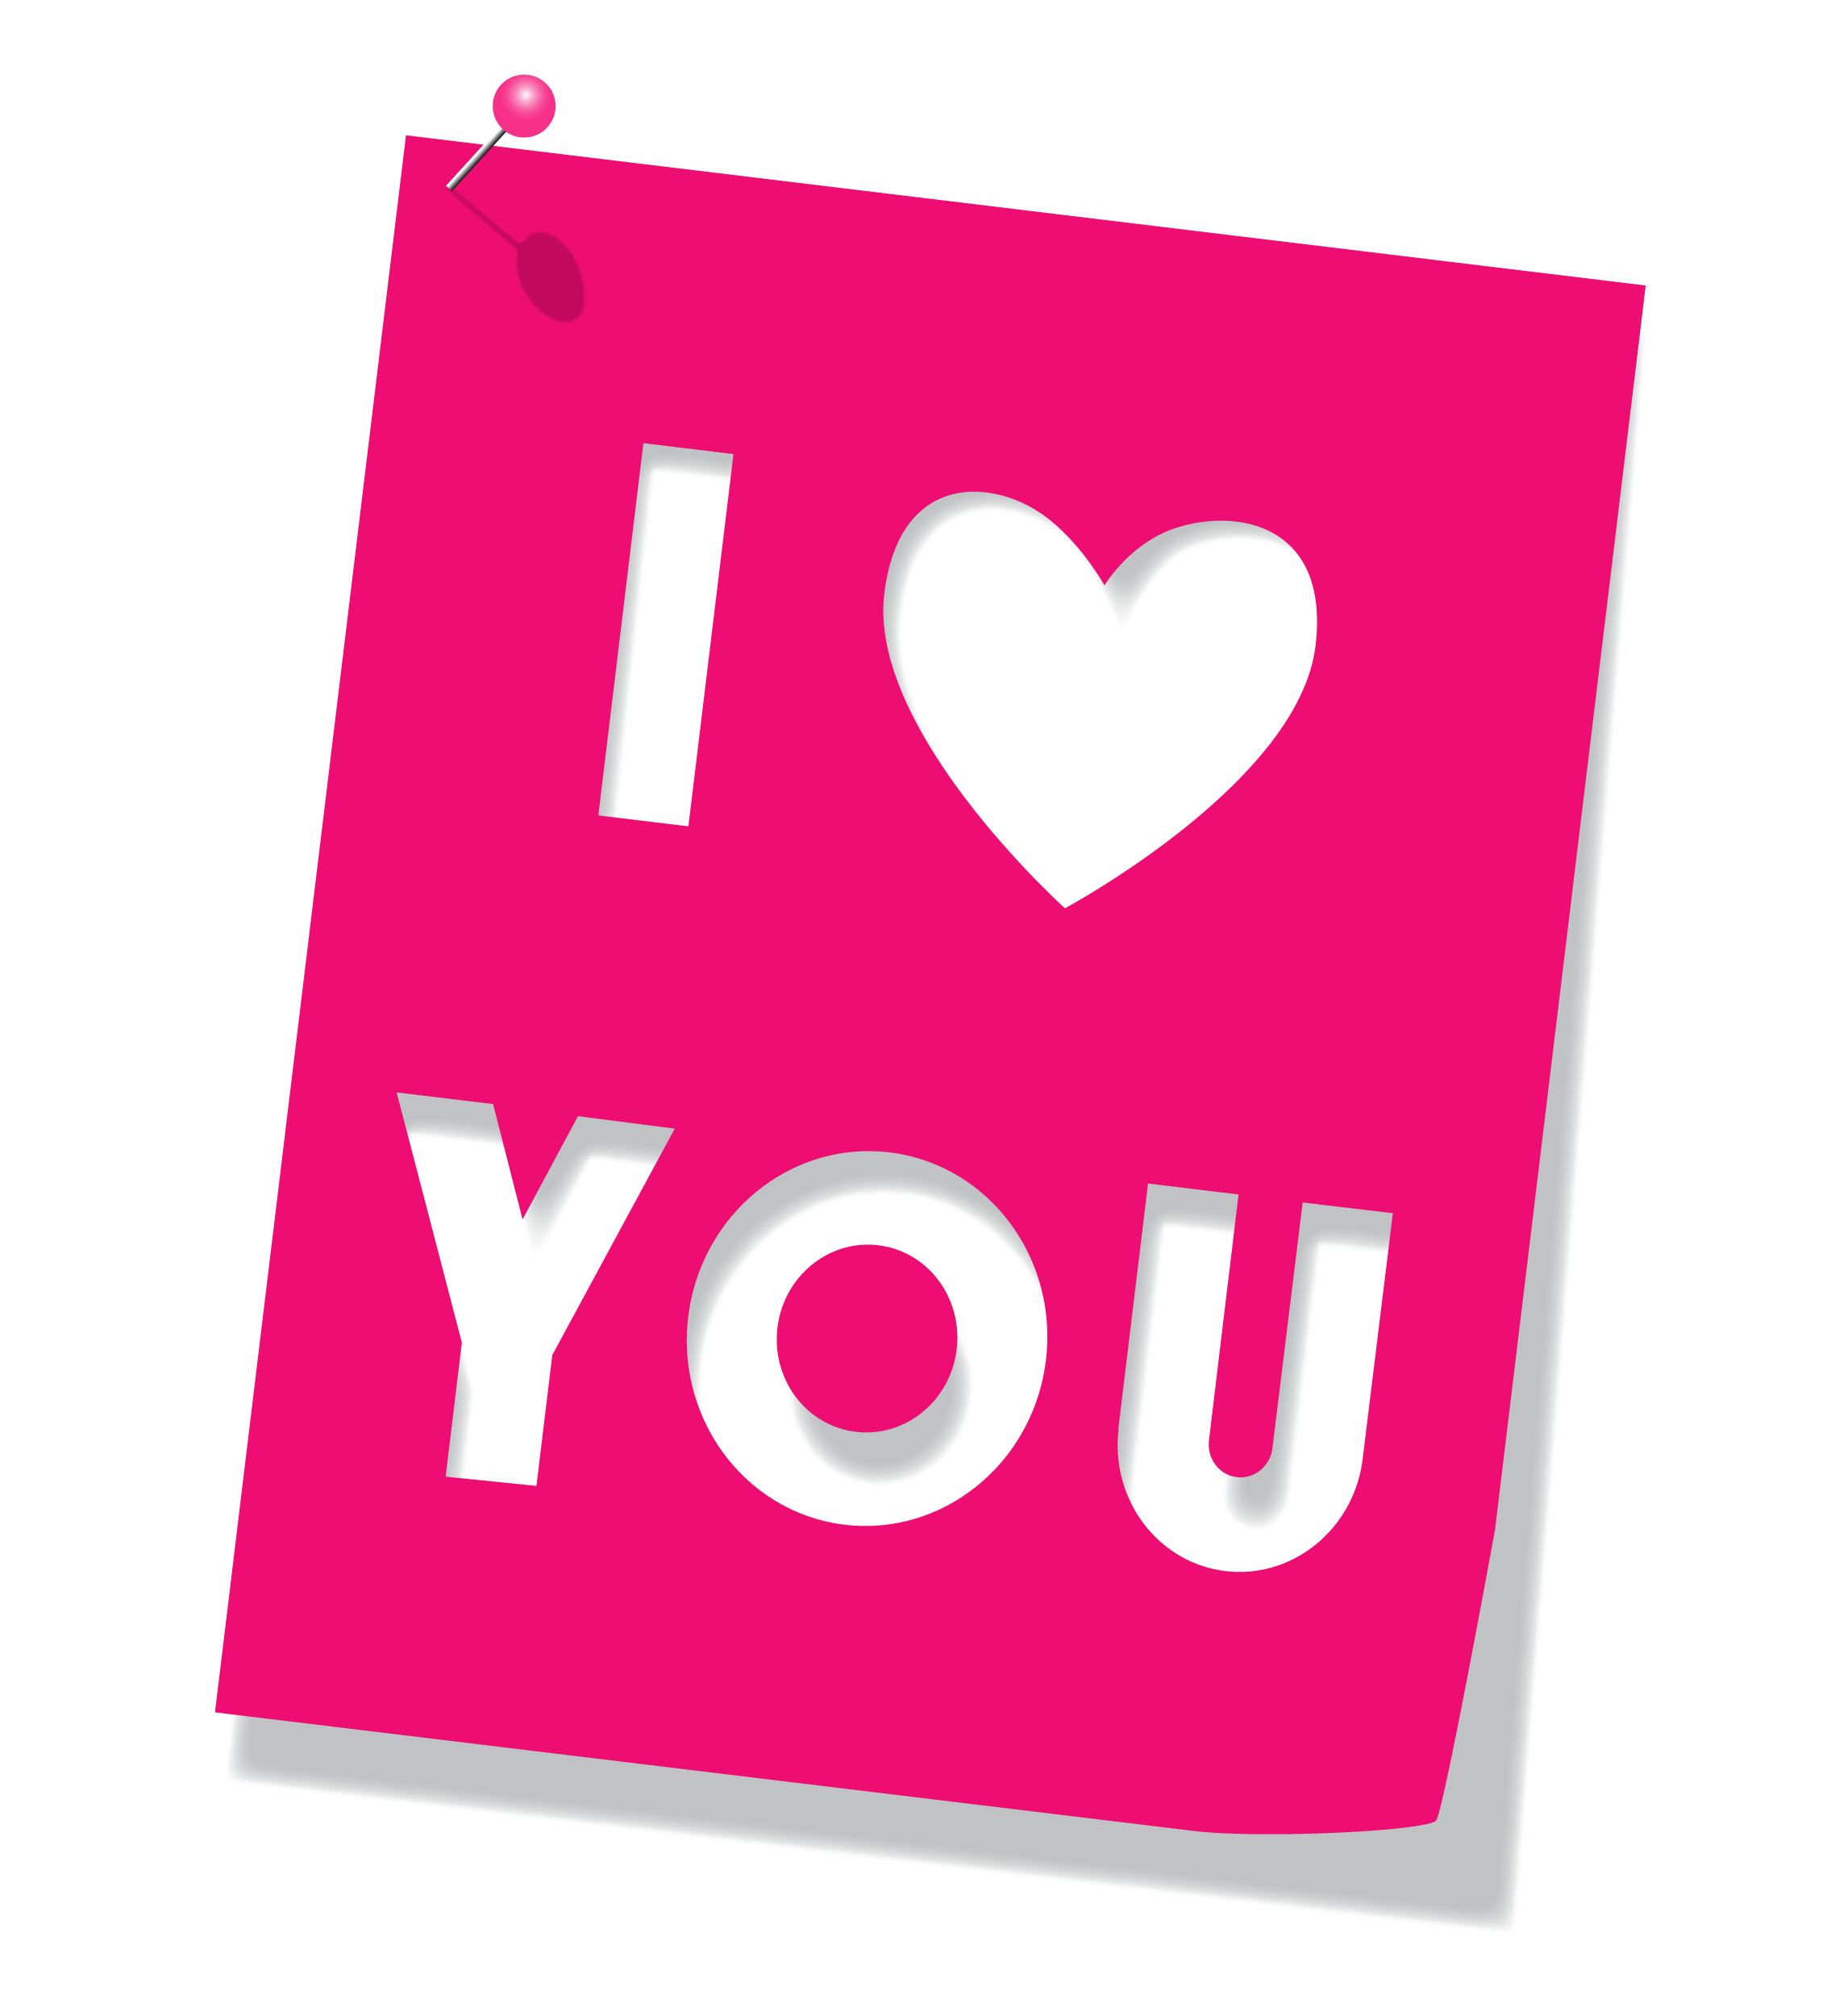  - Love You Clipart